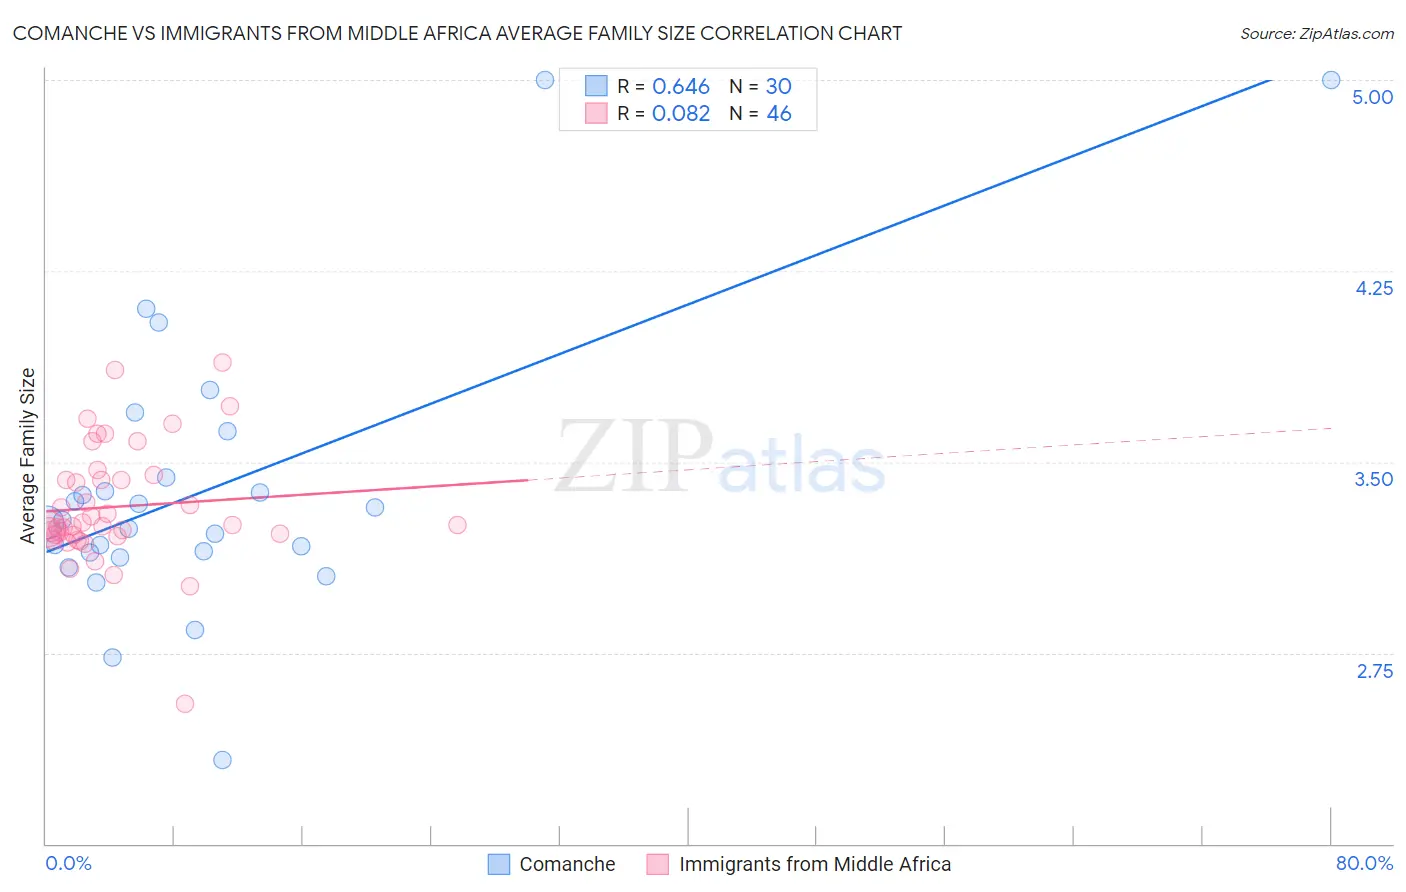 Comanche vs Immigrants from Middle Africa Average Family Size